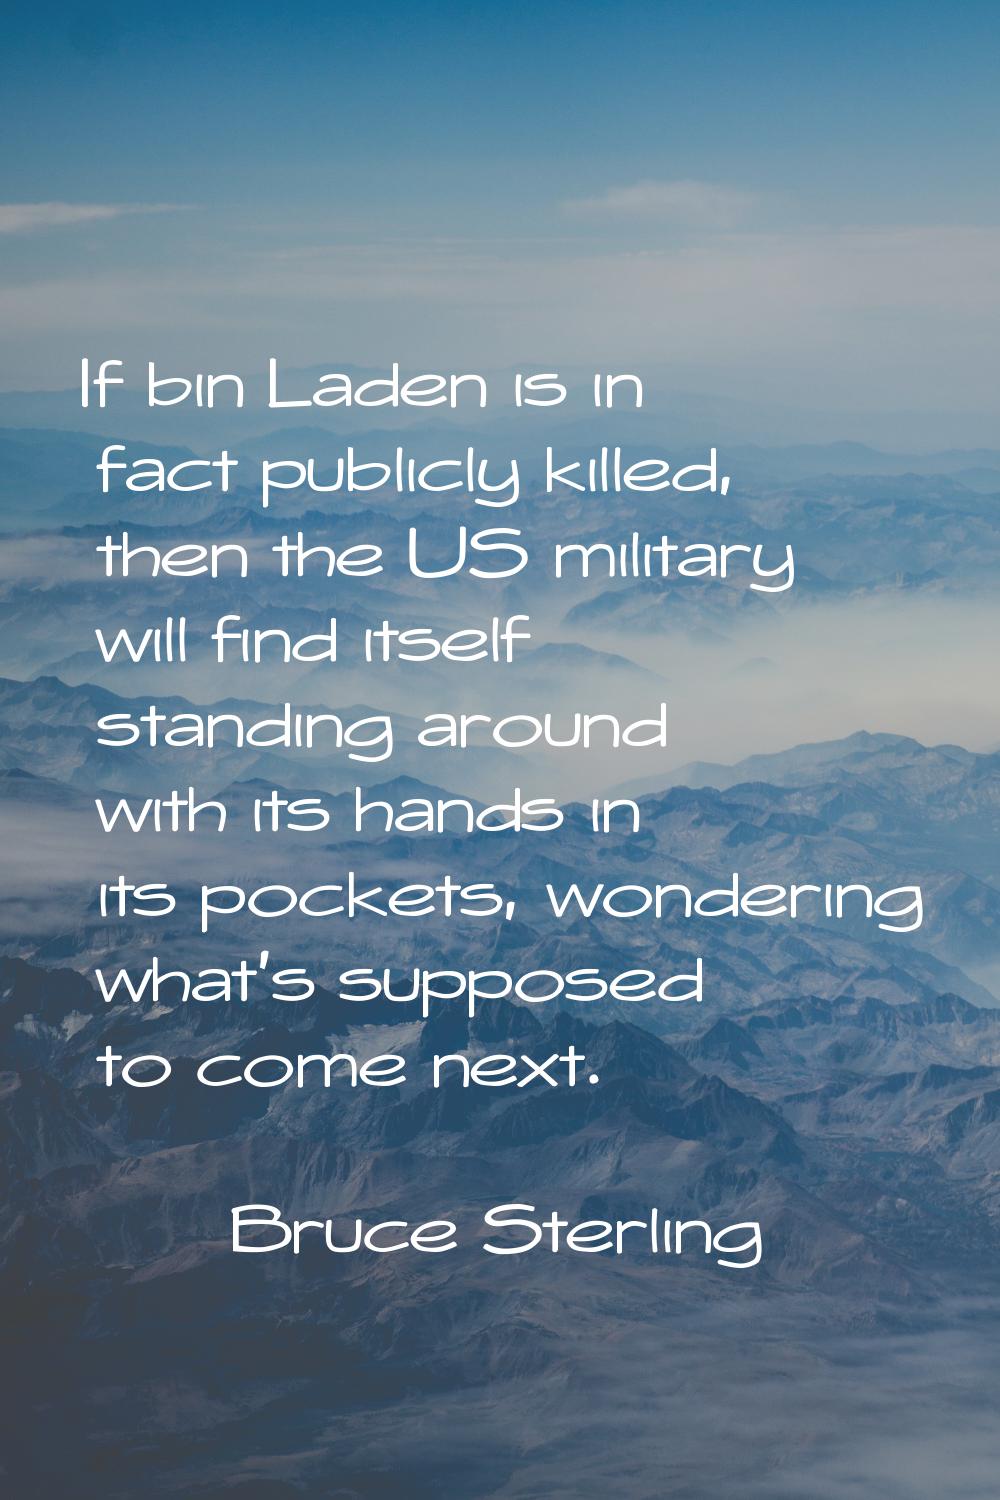 If bin Laden is in fact publicly killed, then the US military will find itself standing around with